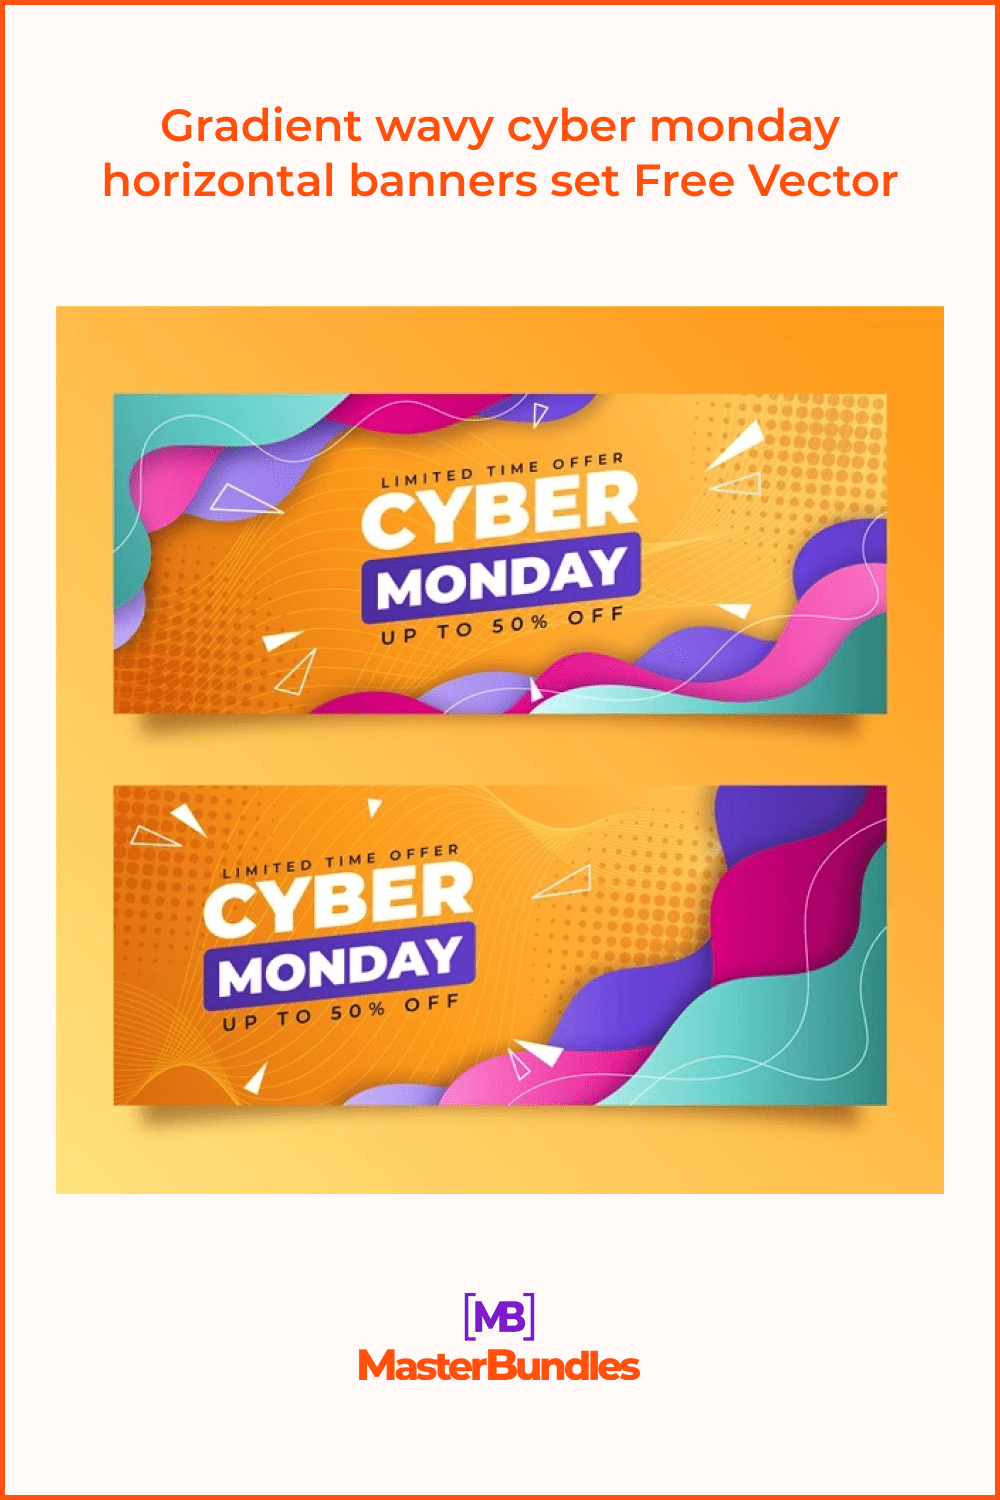 Cyber Monday Orange Horizontal Banners with Blue and Pink Waves.